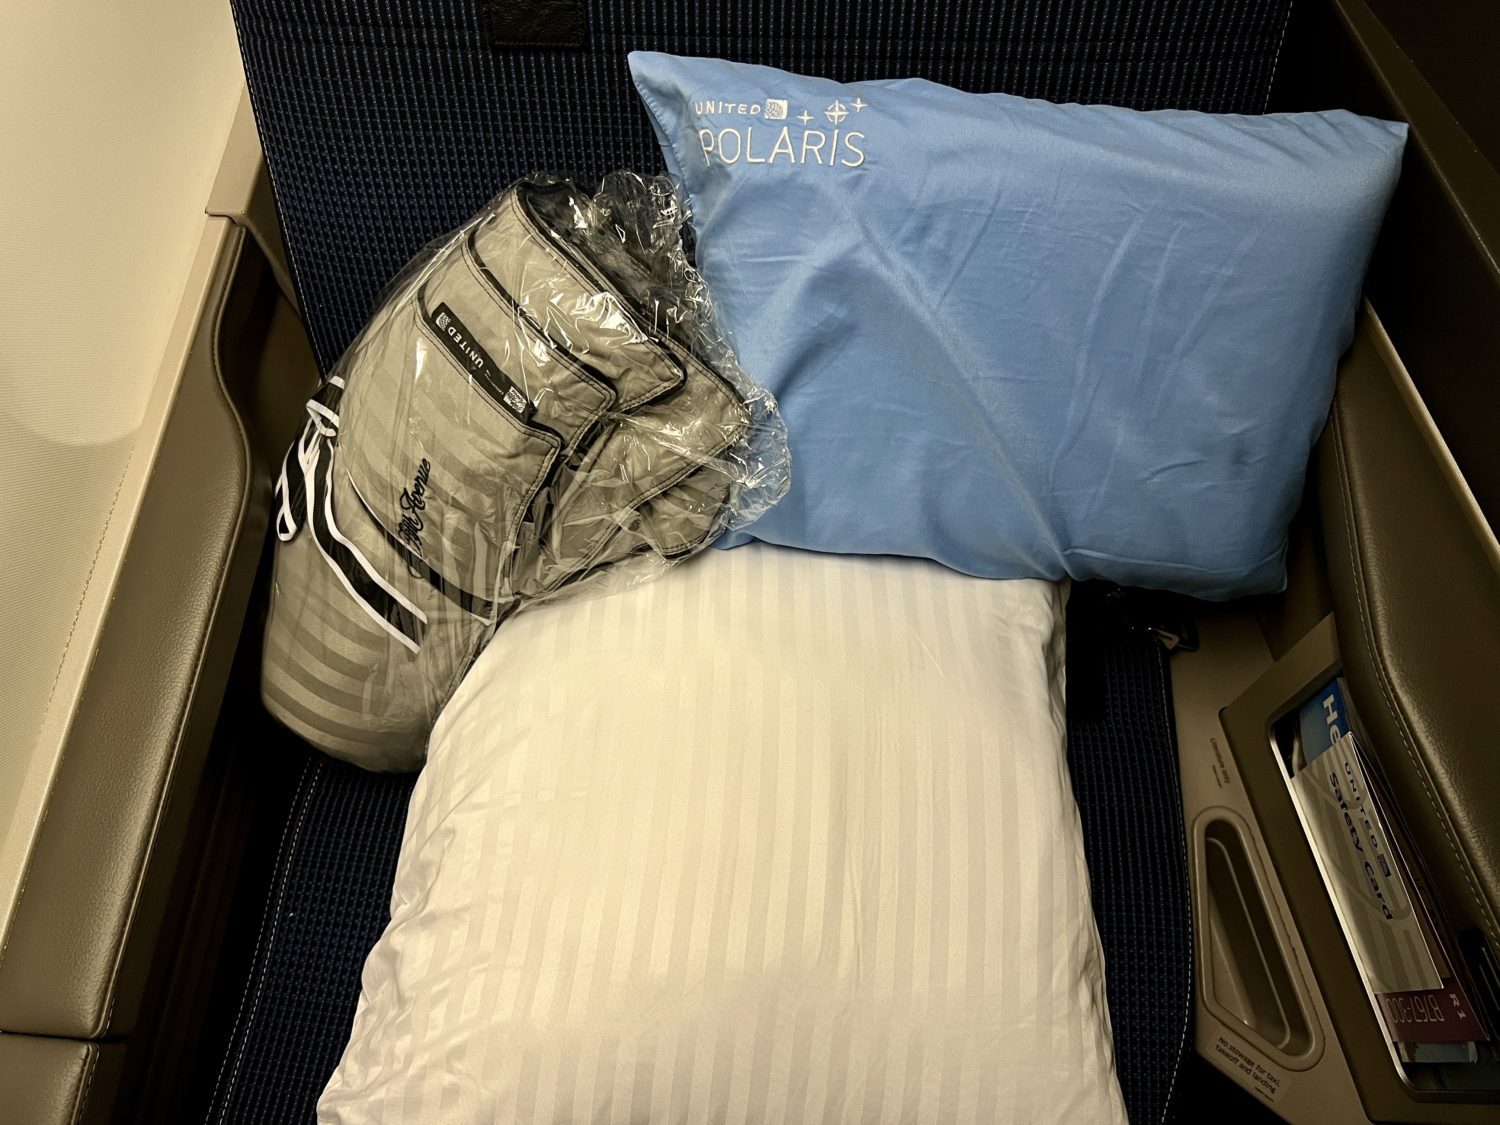 united polaris bedding  United Polaris Business Class Review on the 767-300 &#8211; Thrifty Traveler united polaris bedding scaled